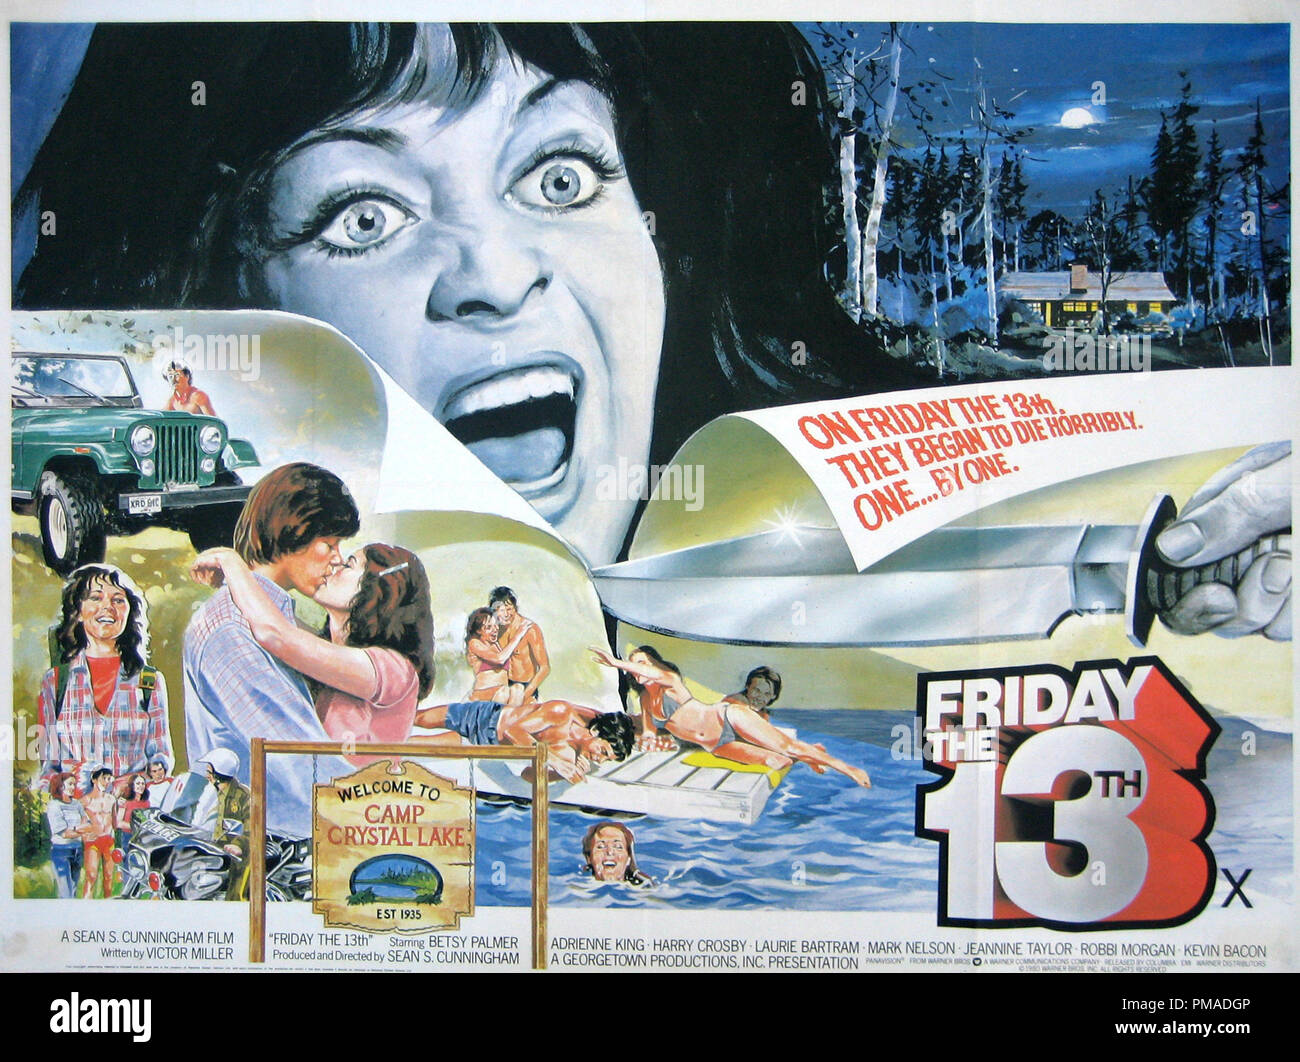 Friday the 13th (1980 film), Warner Bros. Entertainment Wiki